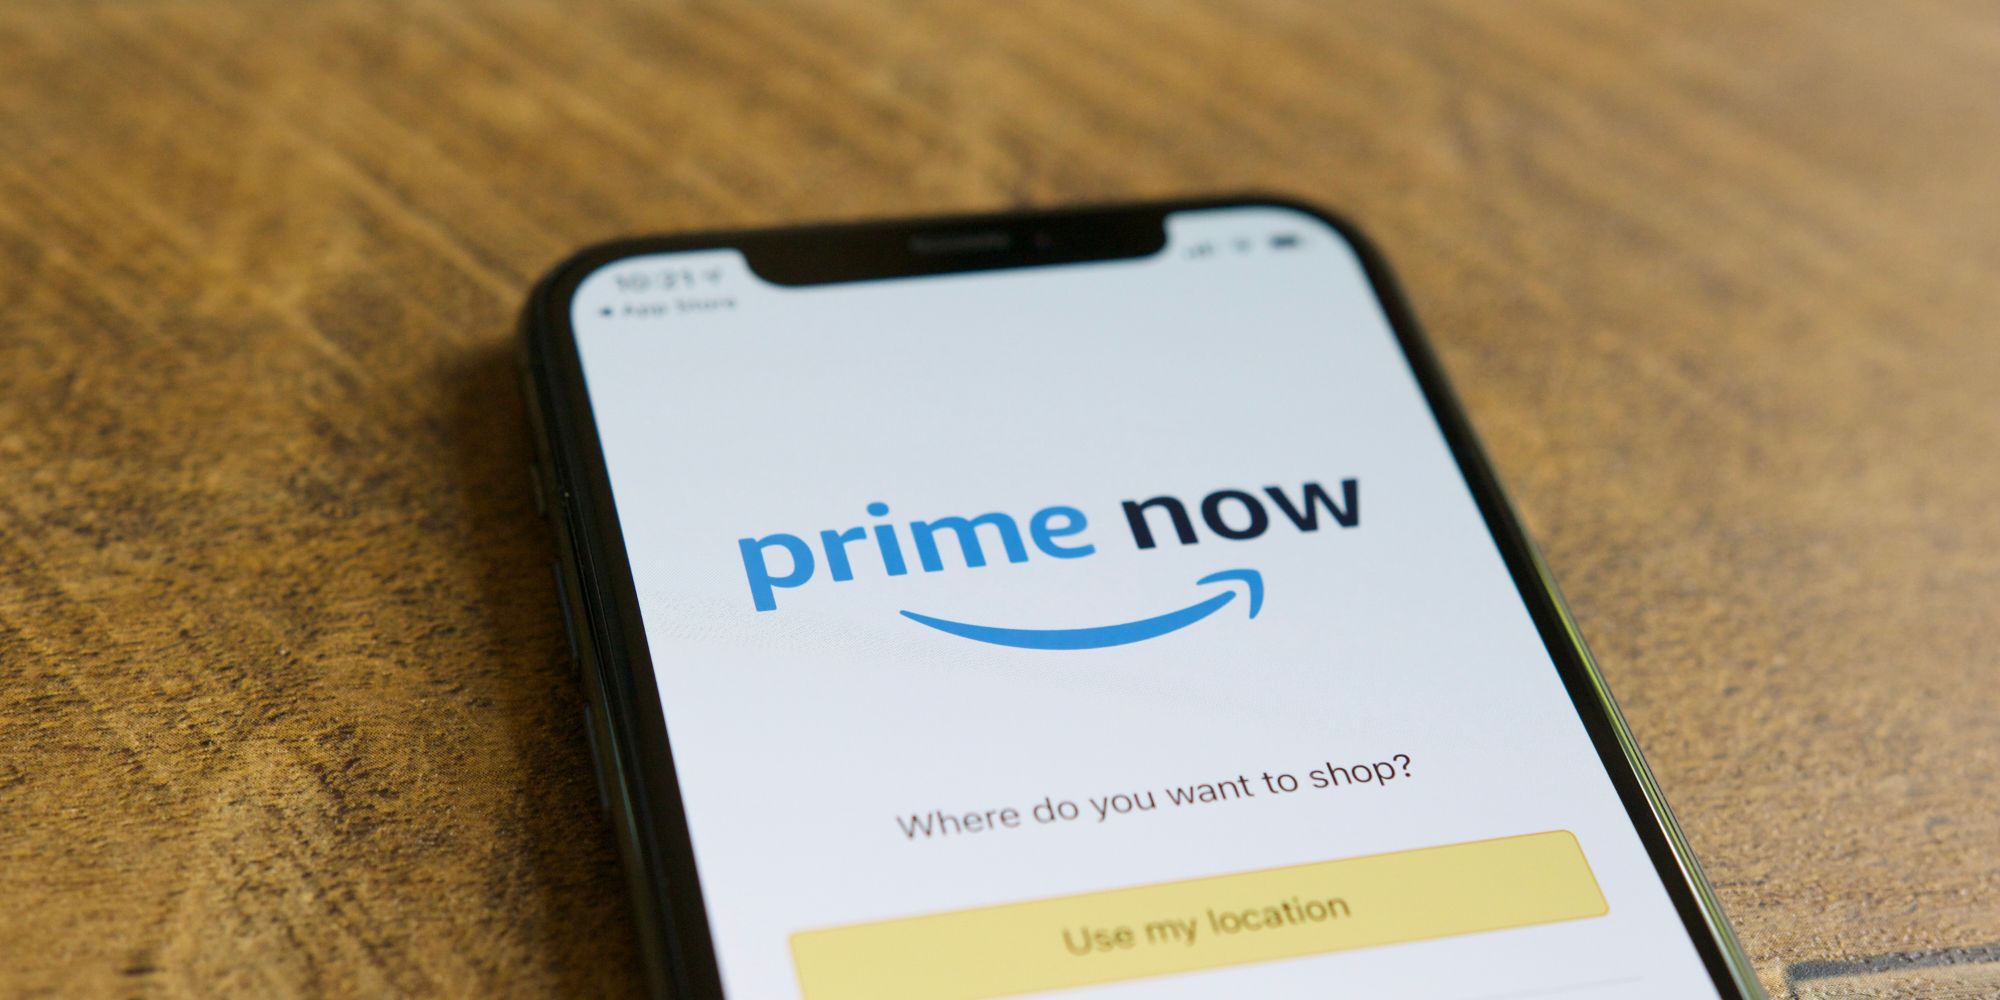 Amazon Prime Now app on an iPhone